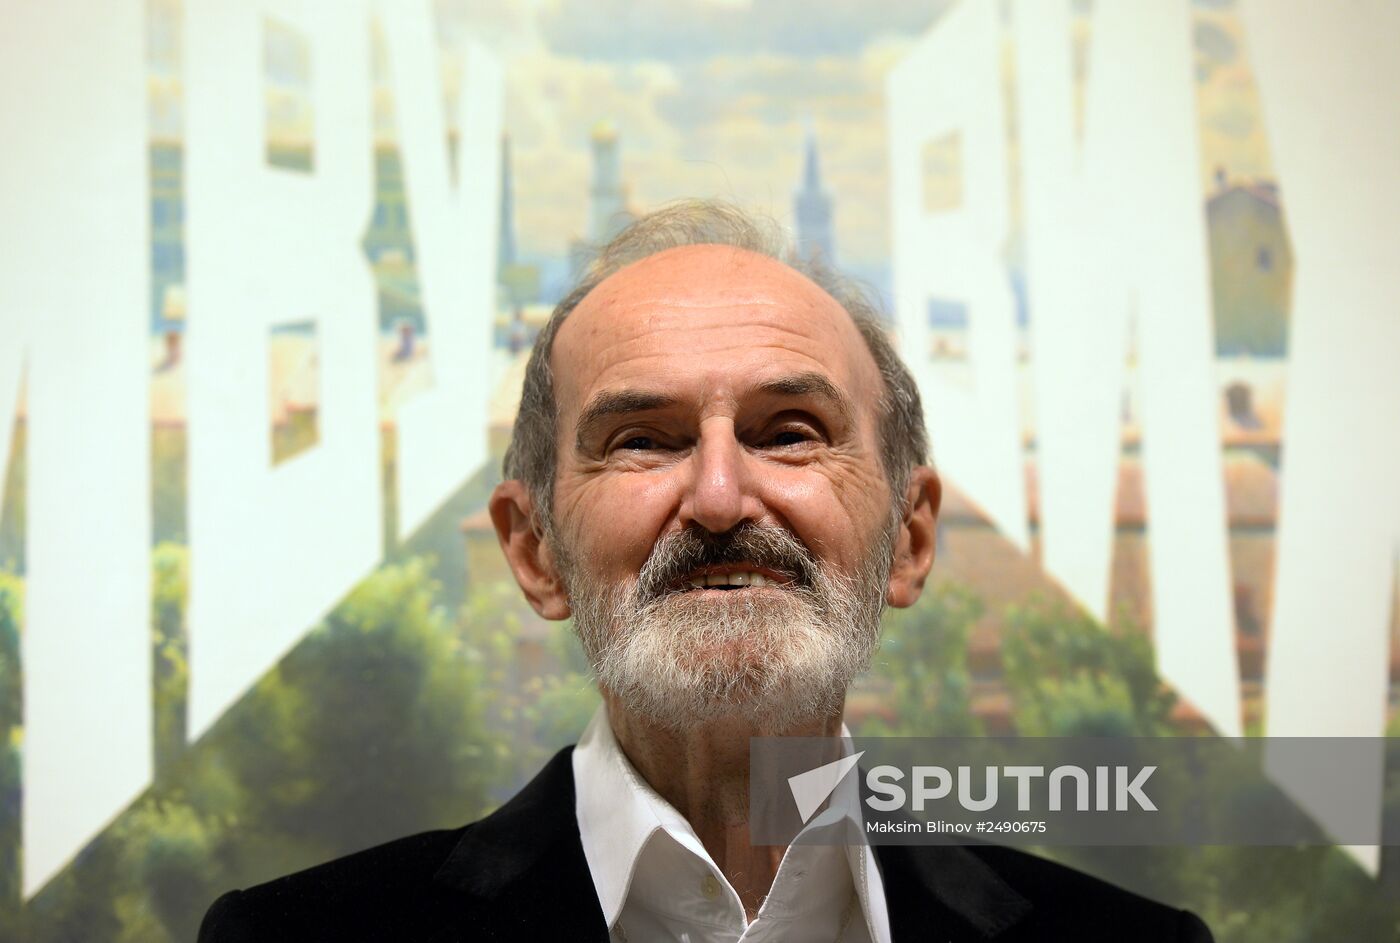 Exhibition "Erk Bulatov. I live--I see" opens in Moscow